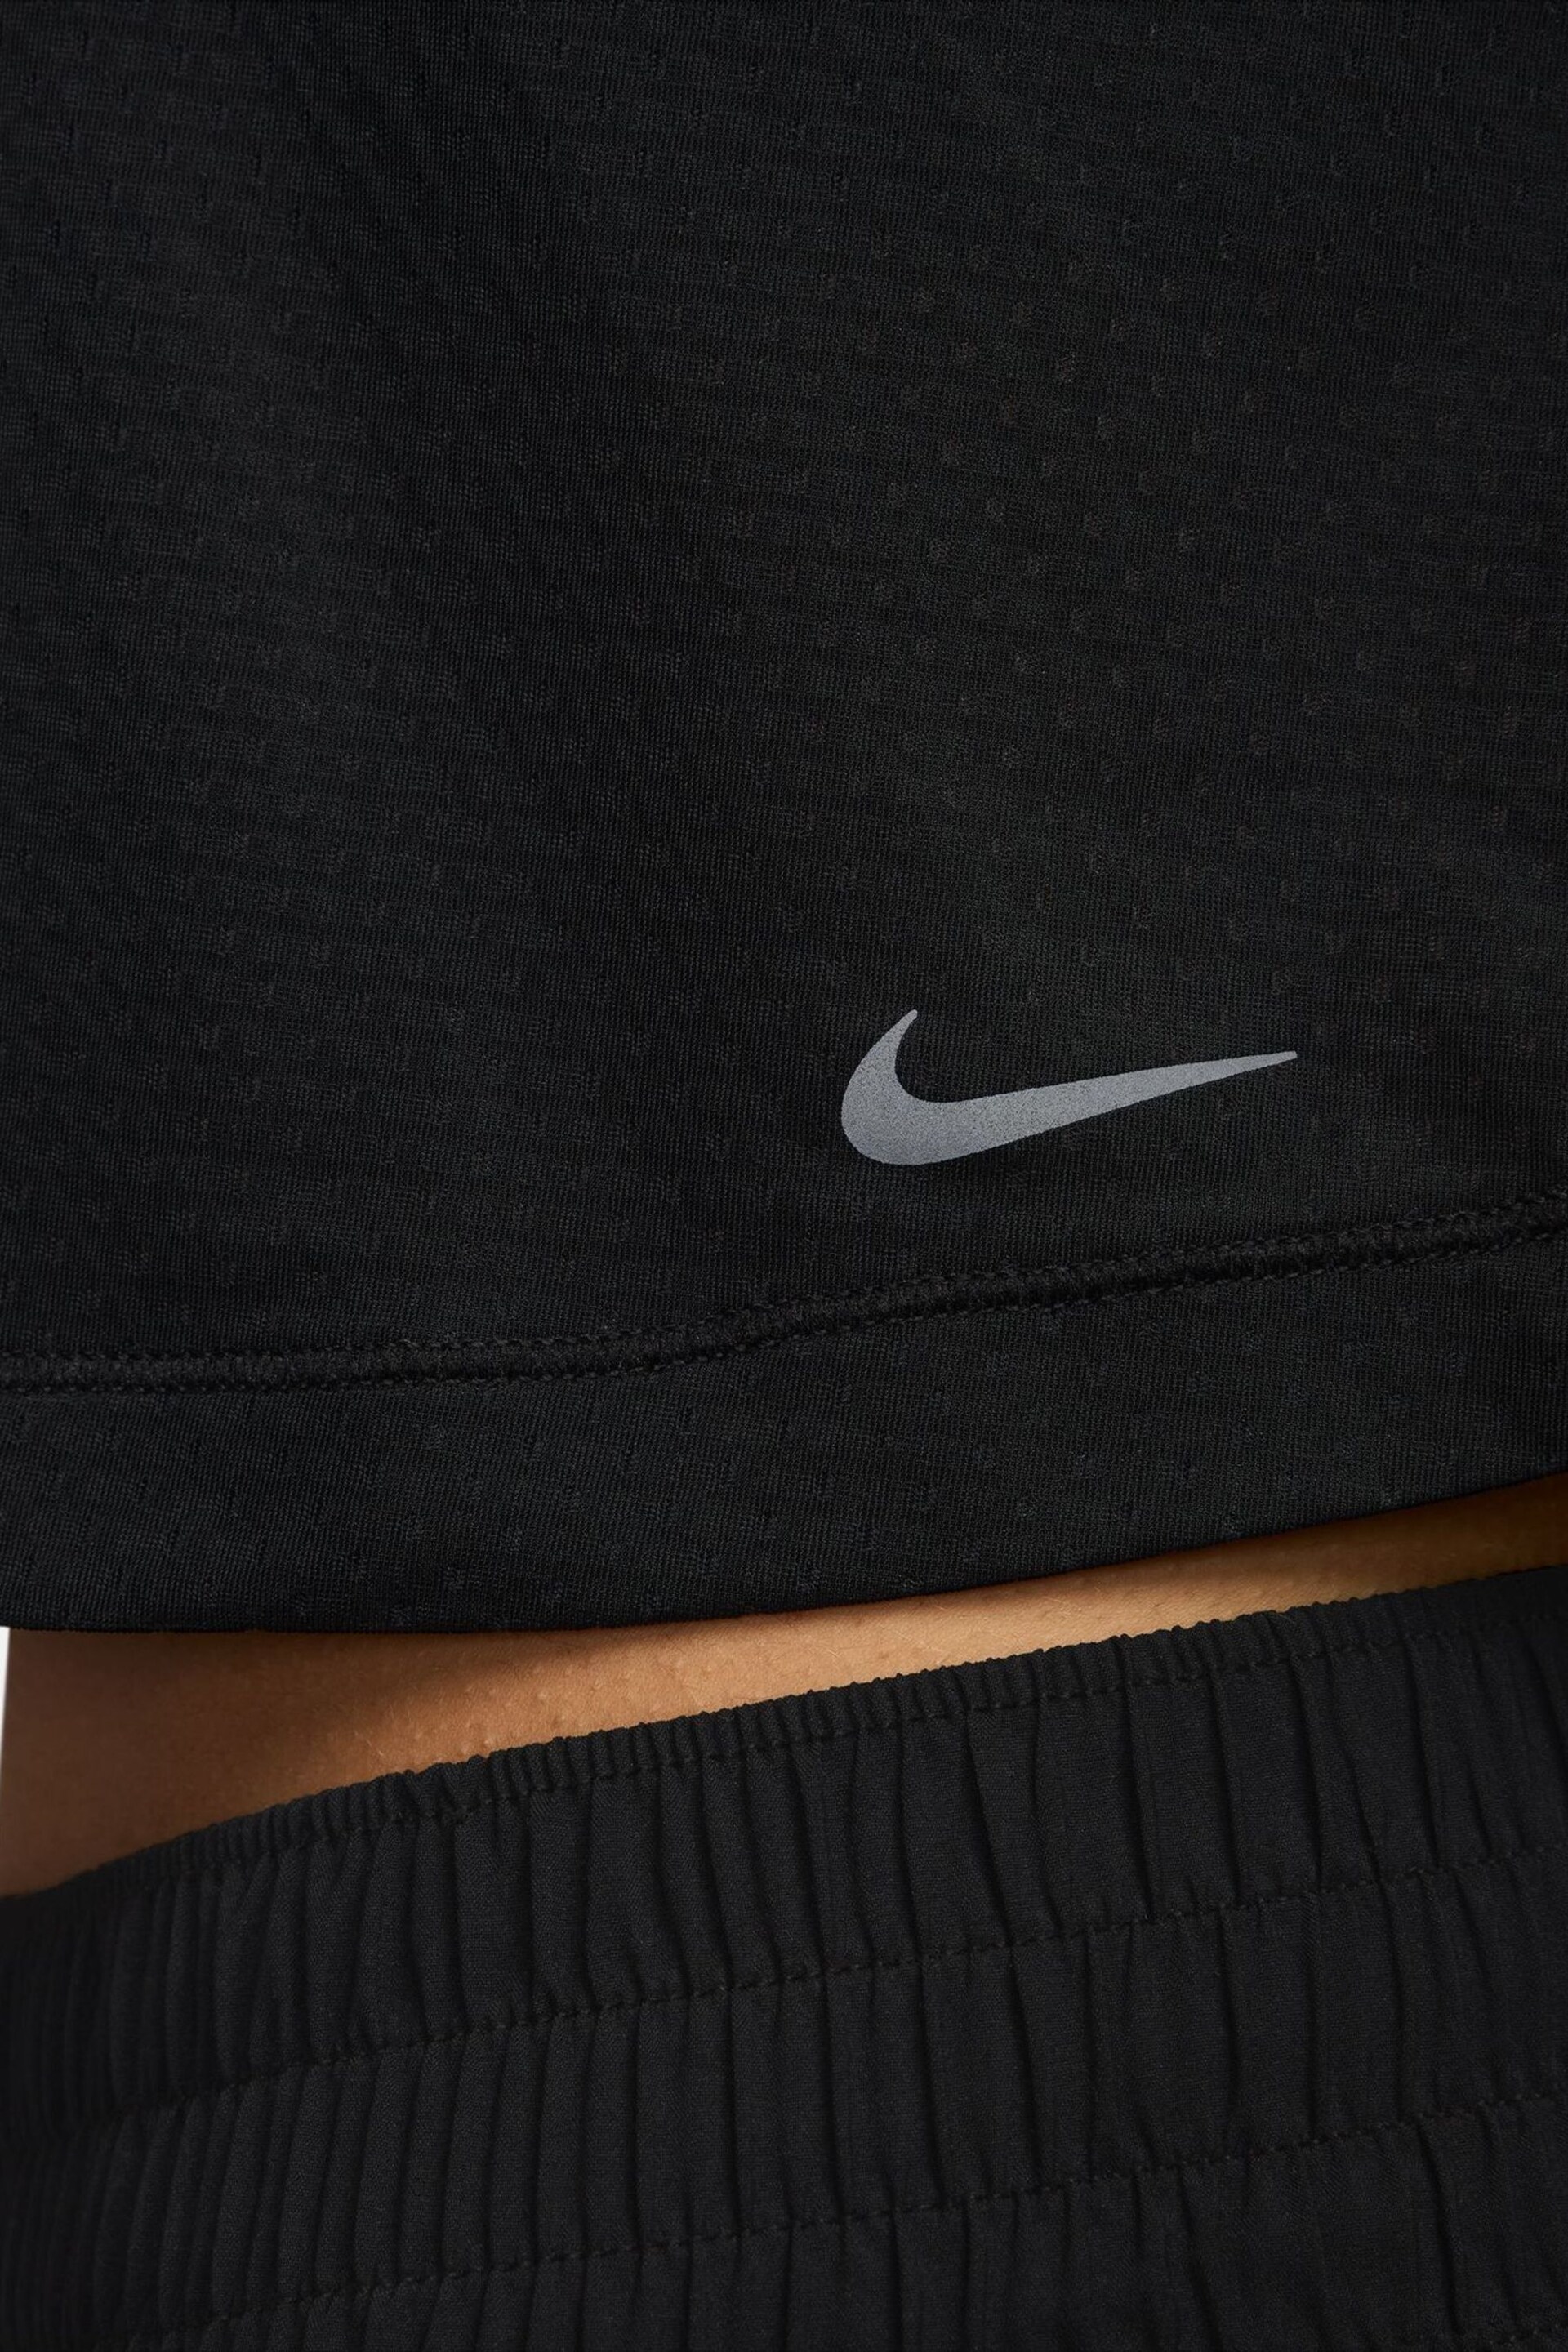 Nike Black Dri-FIT One Classic Breathable Vest Top - Image 5 of 7